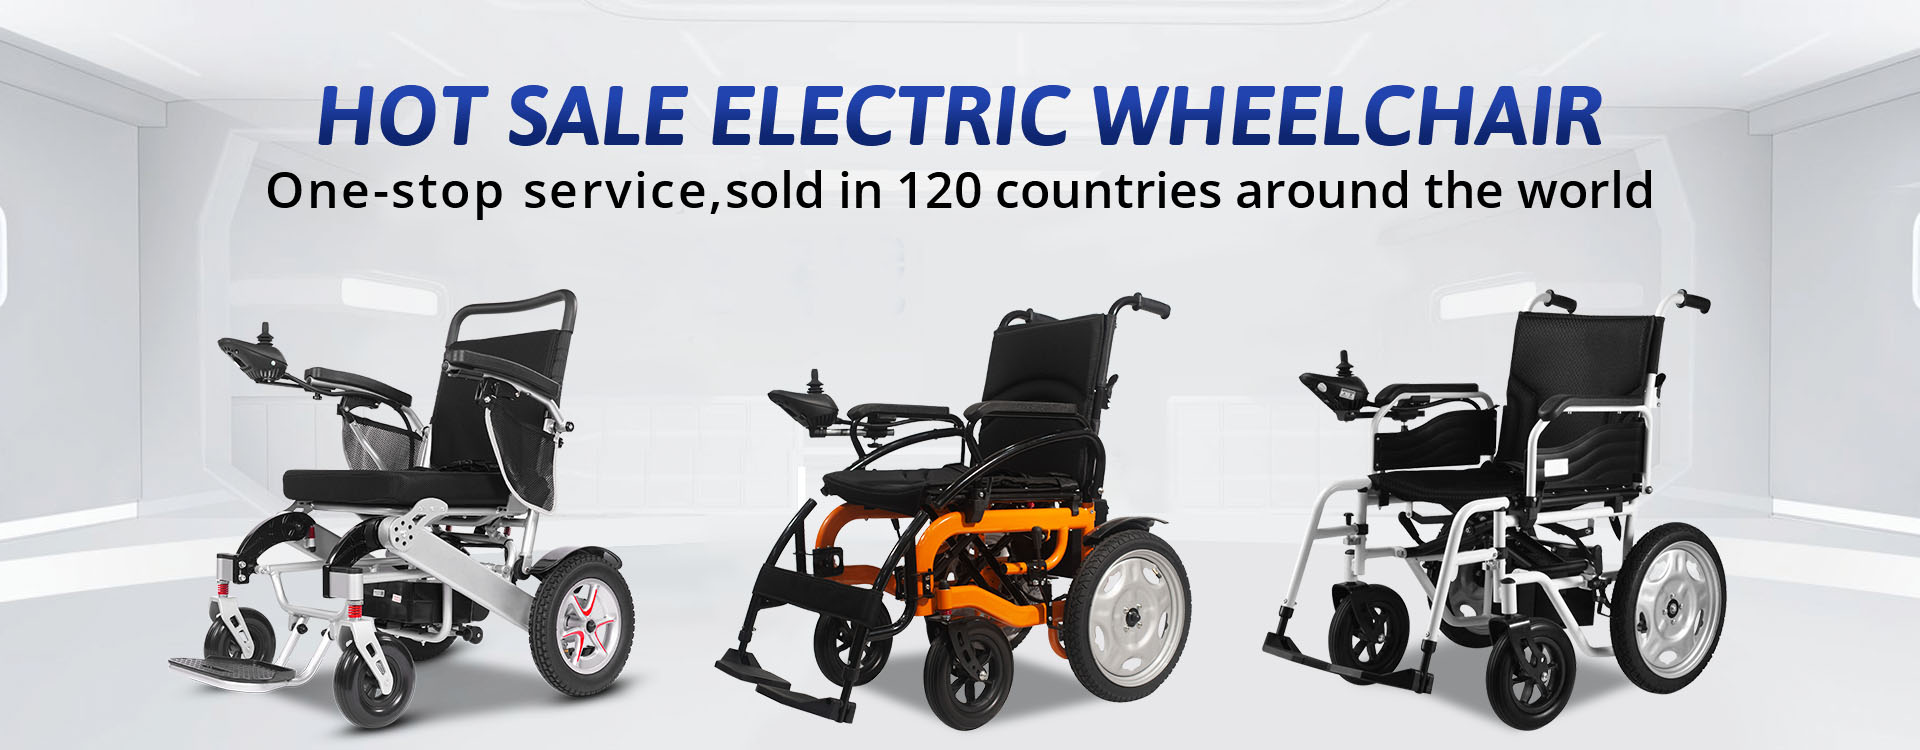 How to choose an electric wheelchair